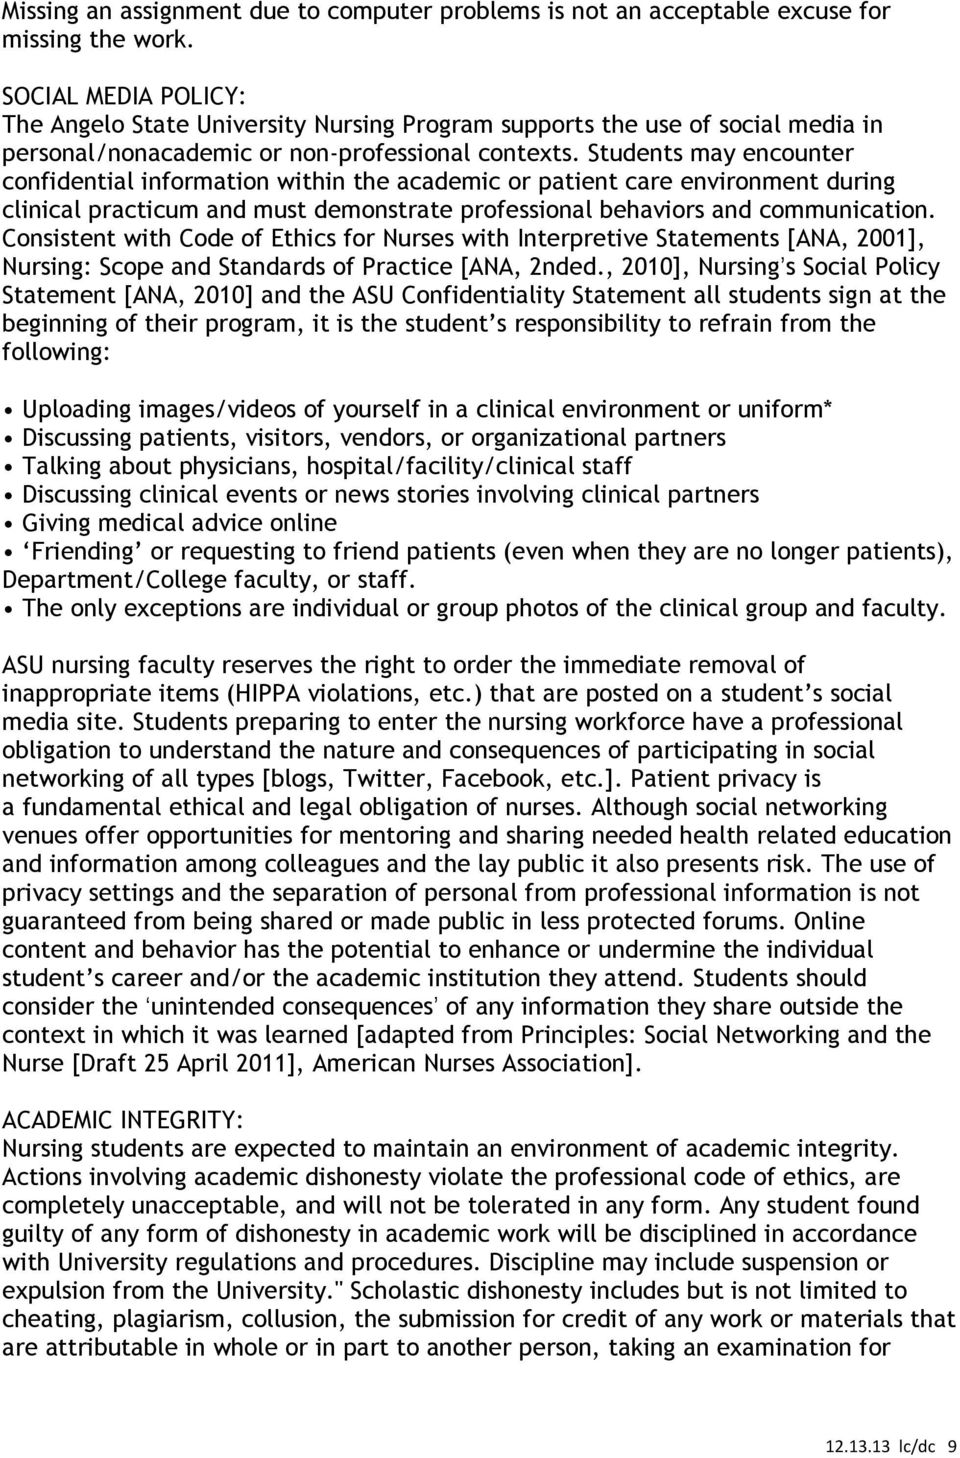 Students may encounter confidential information within the academic or patient care environment during clinical practicum and must demonstrate professional behaviors and communication.